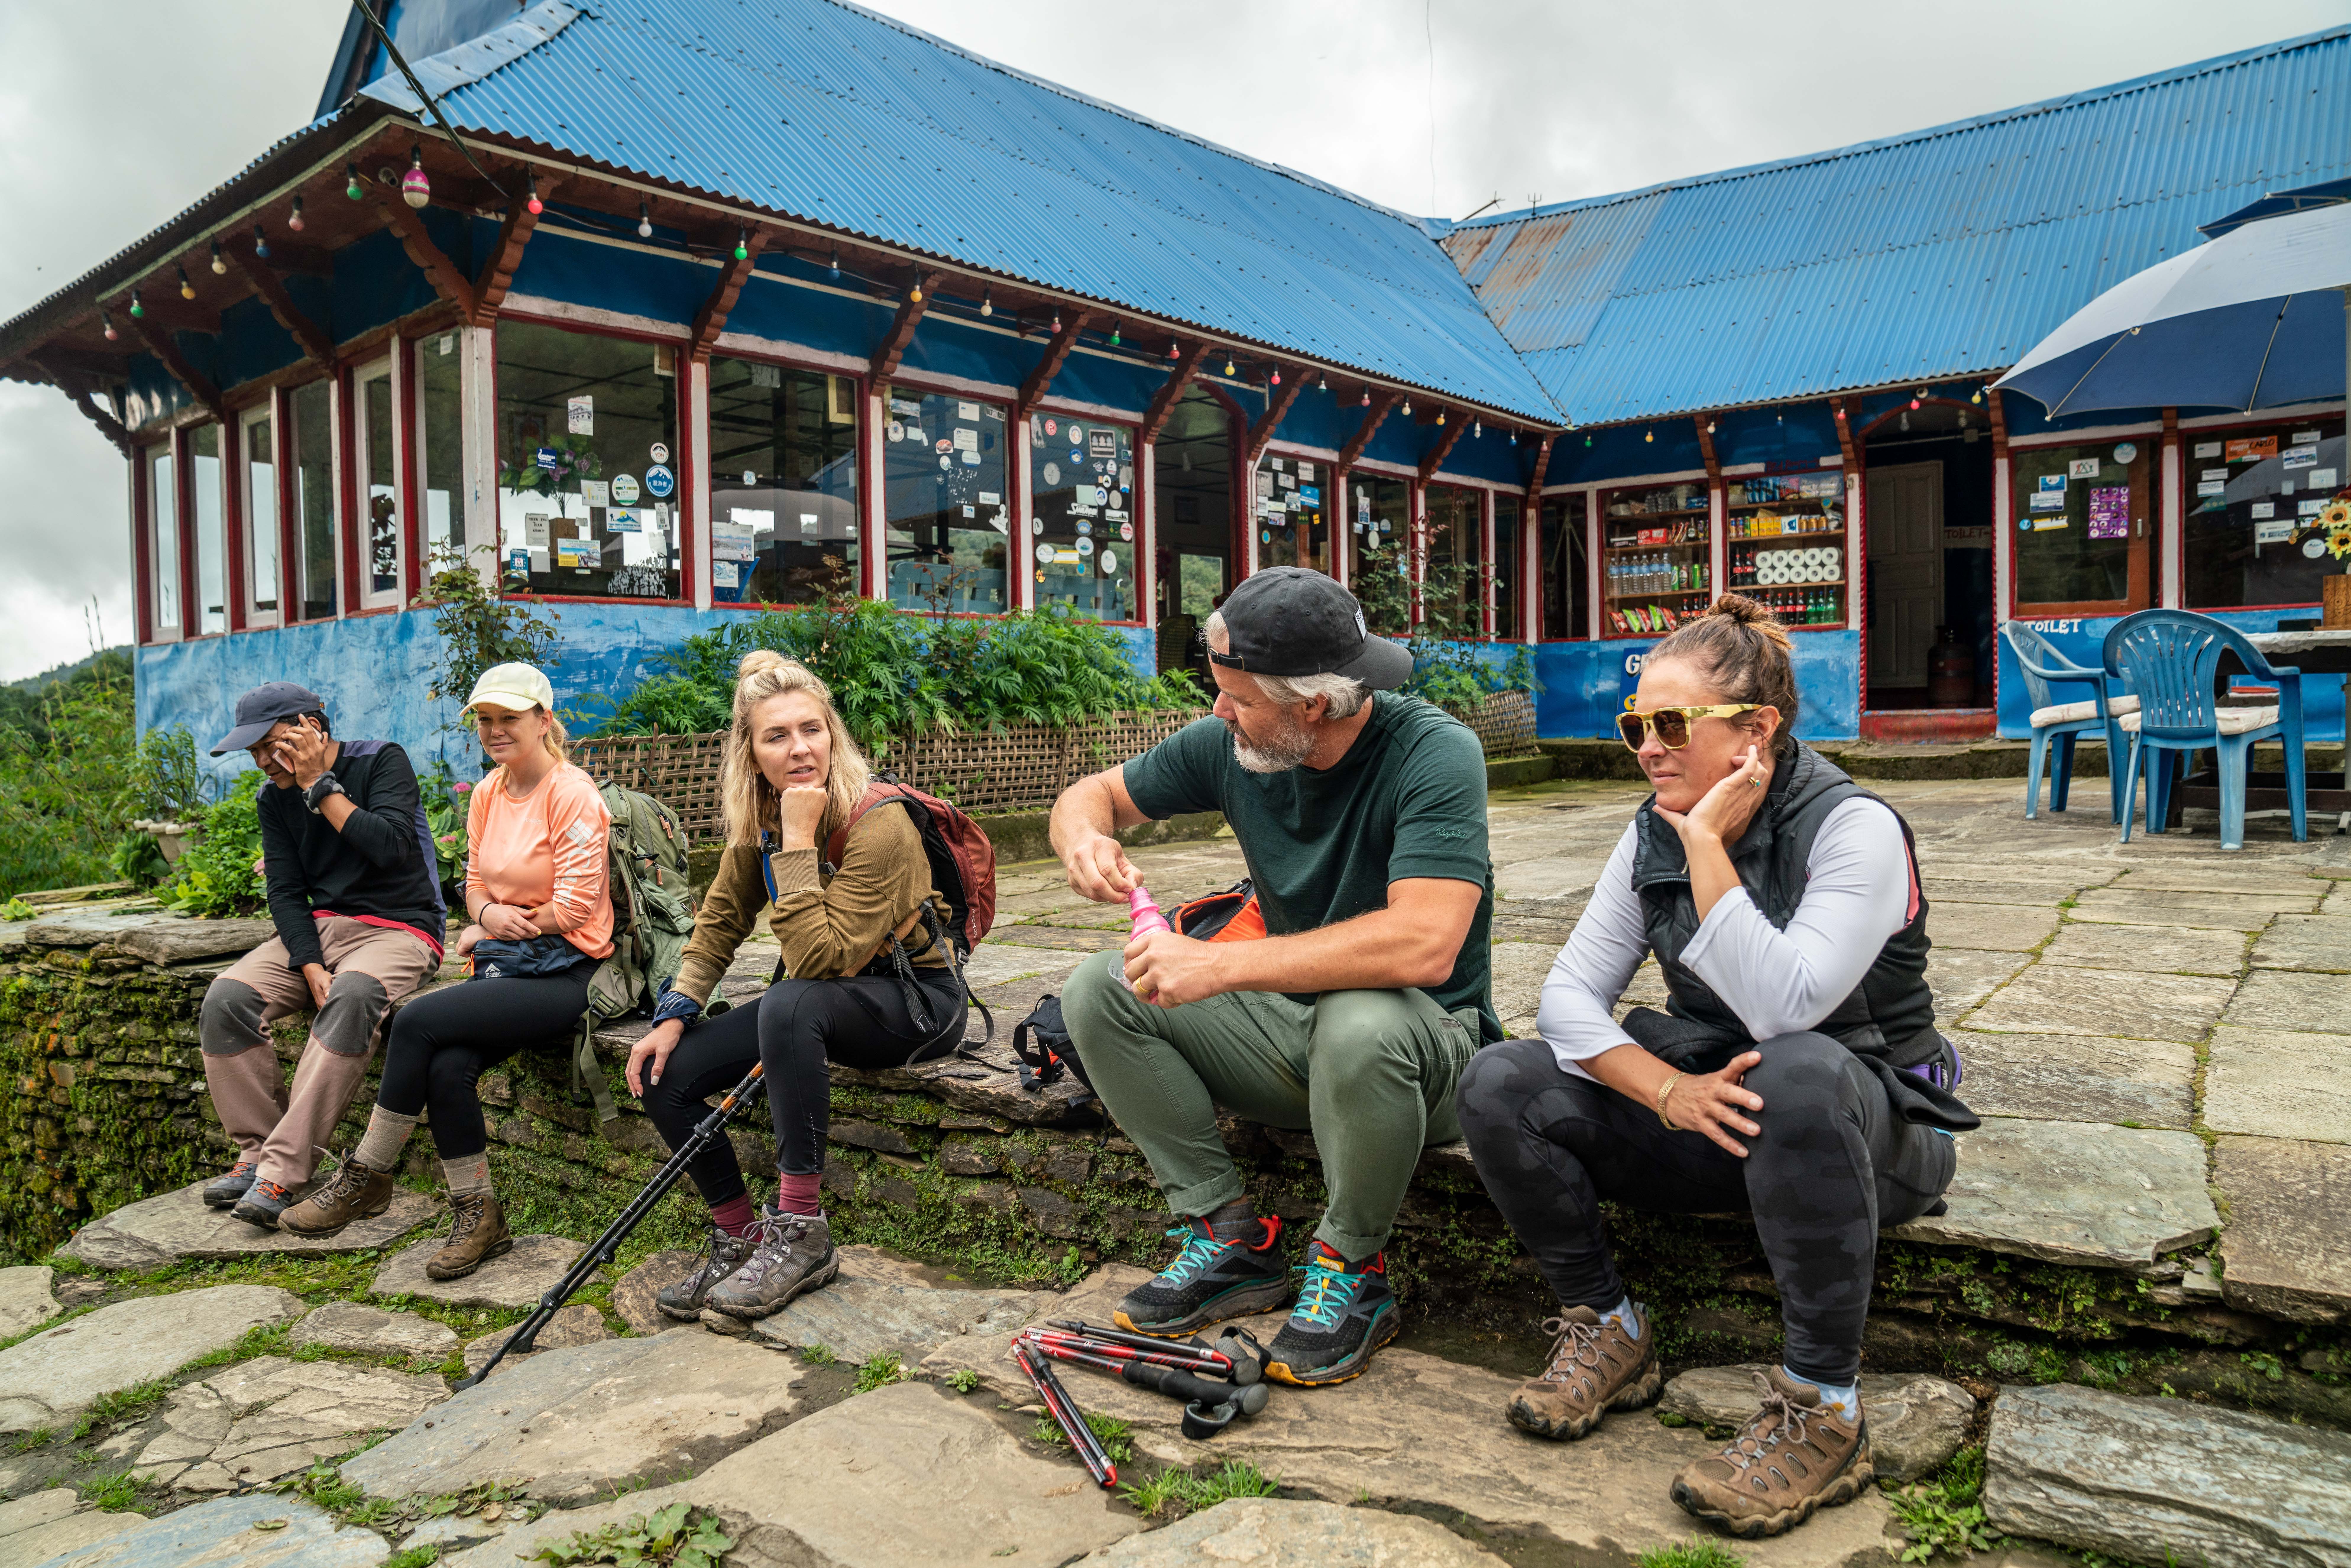 a group of hikers taking a rest break in front of a teahouse in nepal. one hiker is opening a bottle of peptobismal.